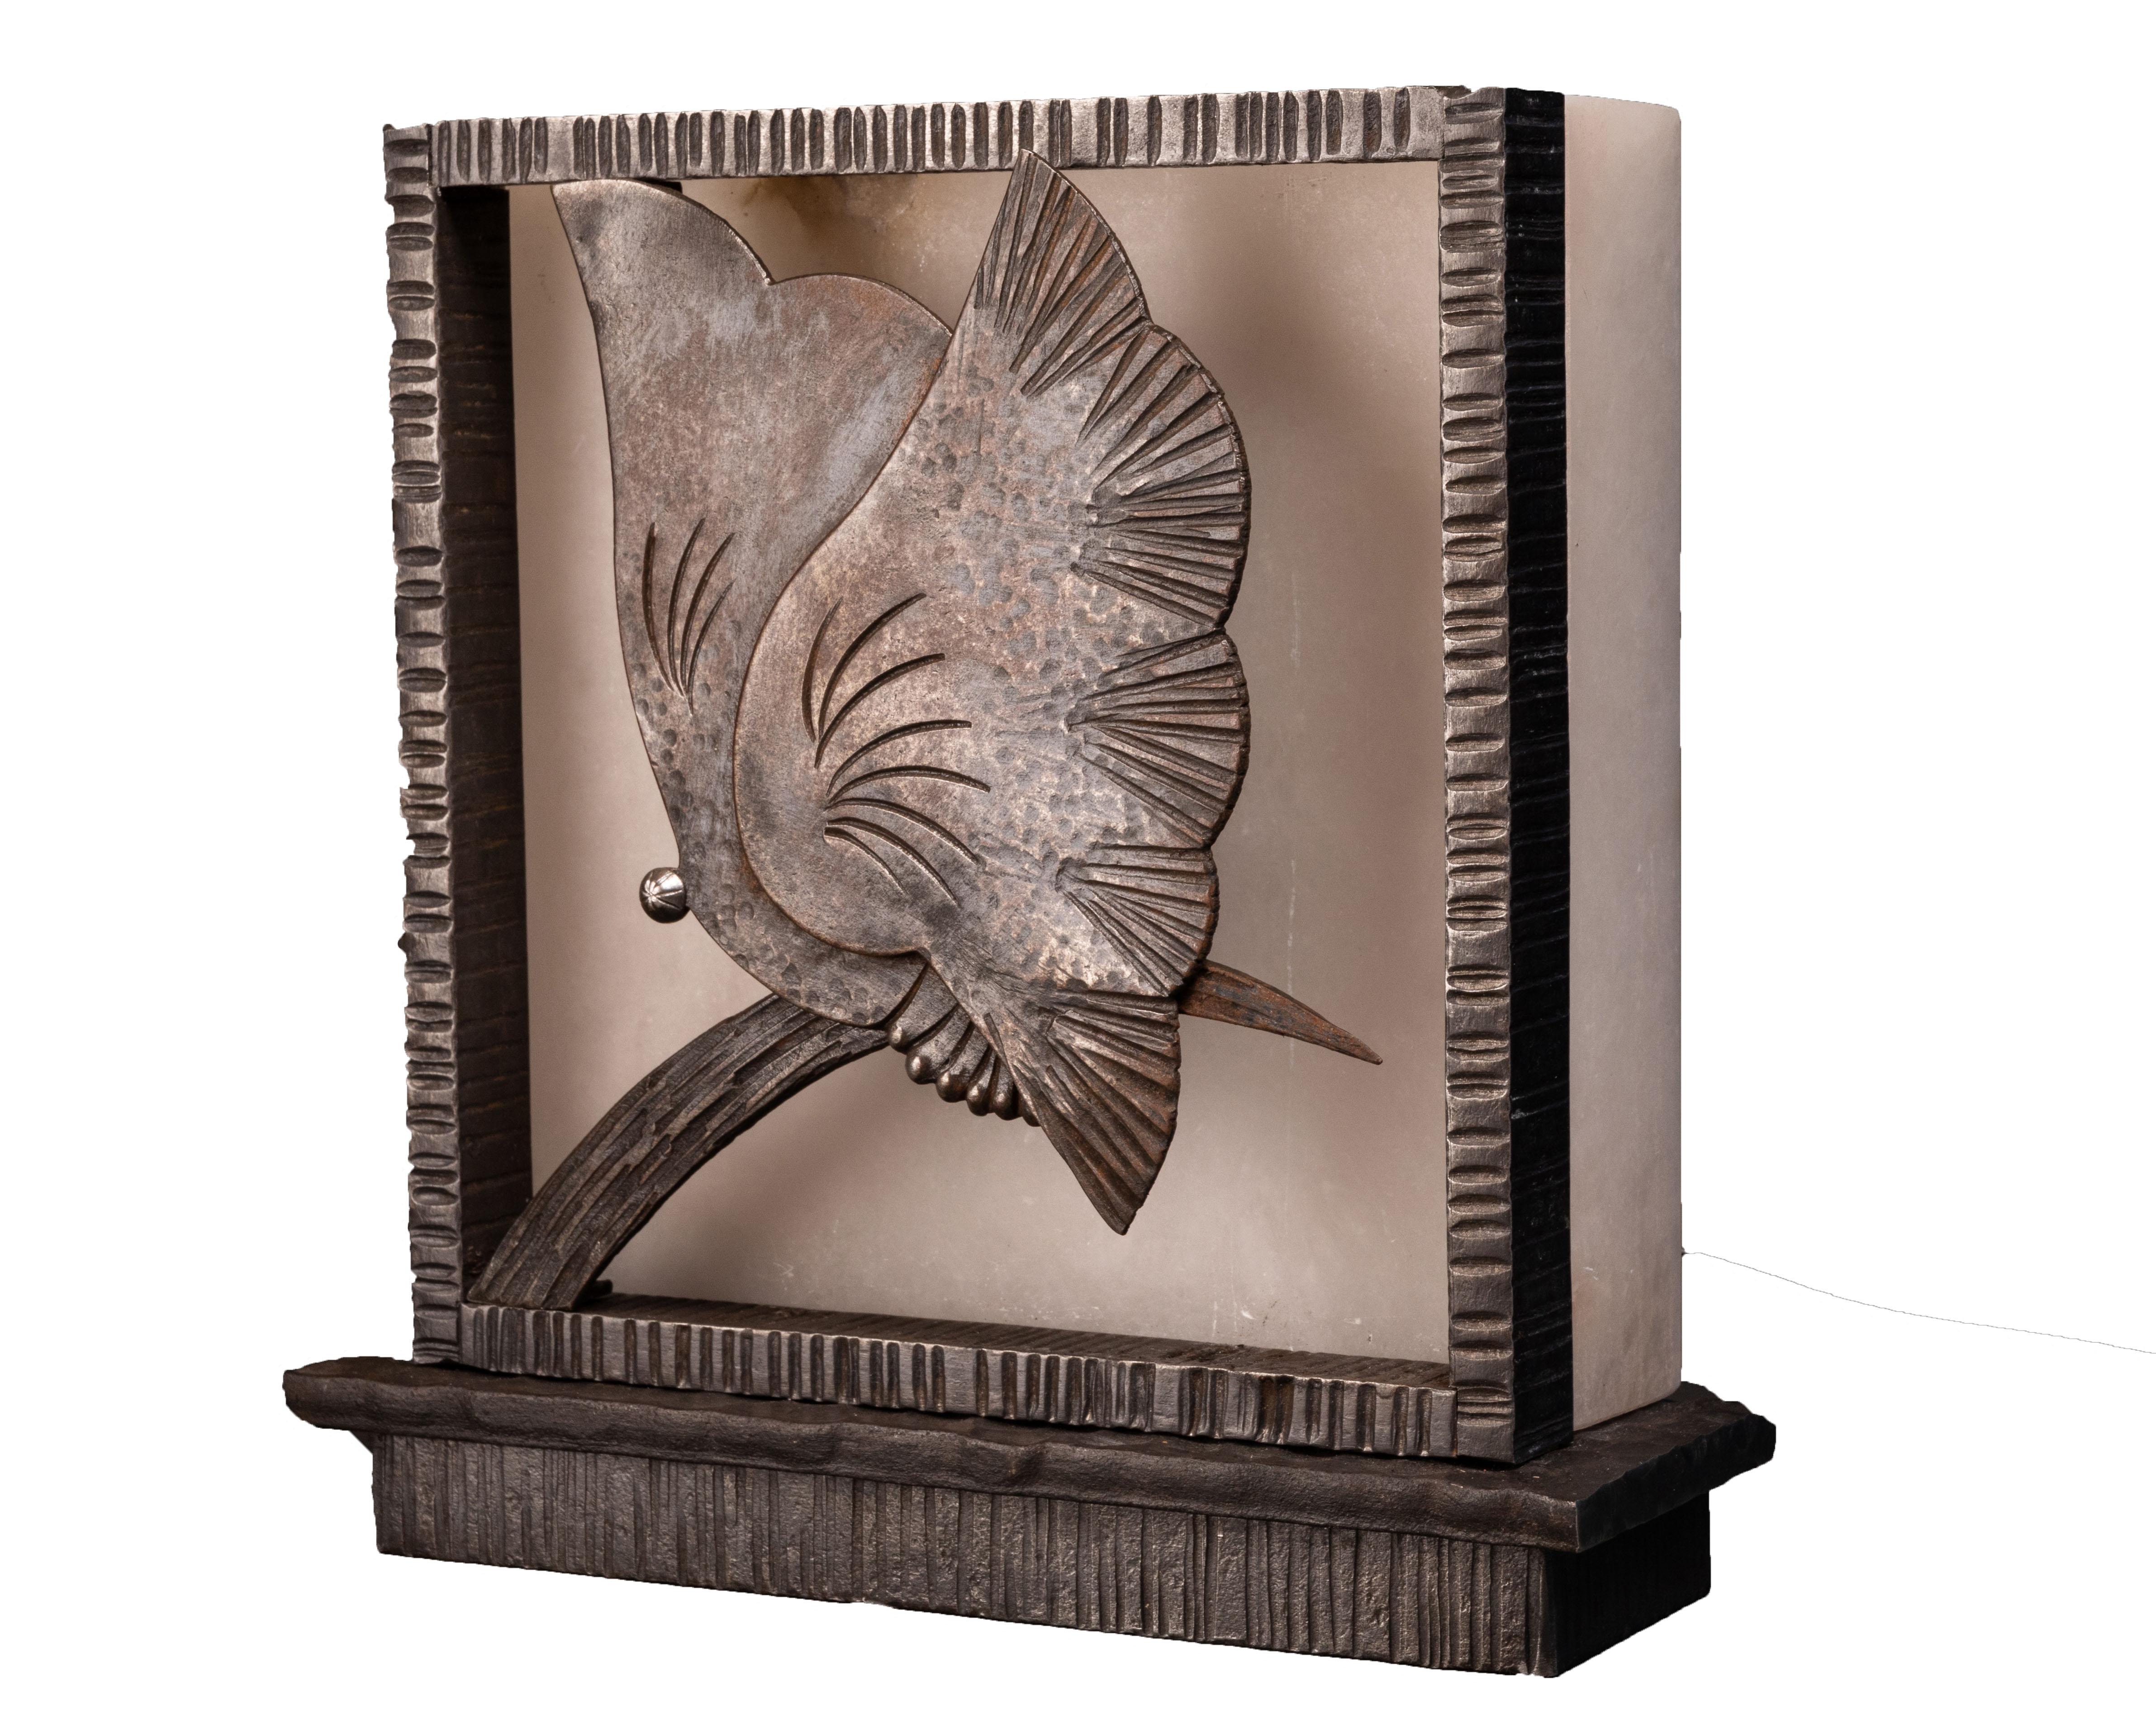 Art Deco butterfly lamp or sconce in wrought iron and alabaster by Edgar Brandt (you can read more about the artist below).

Animal sculpture and Art Deco lamp (or wall lamp) decorated with a butterfly in hammered and chiseled wrought iron.

A